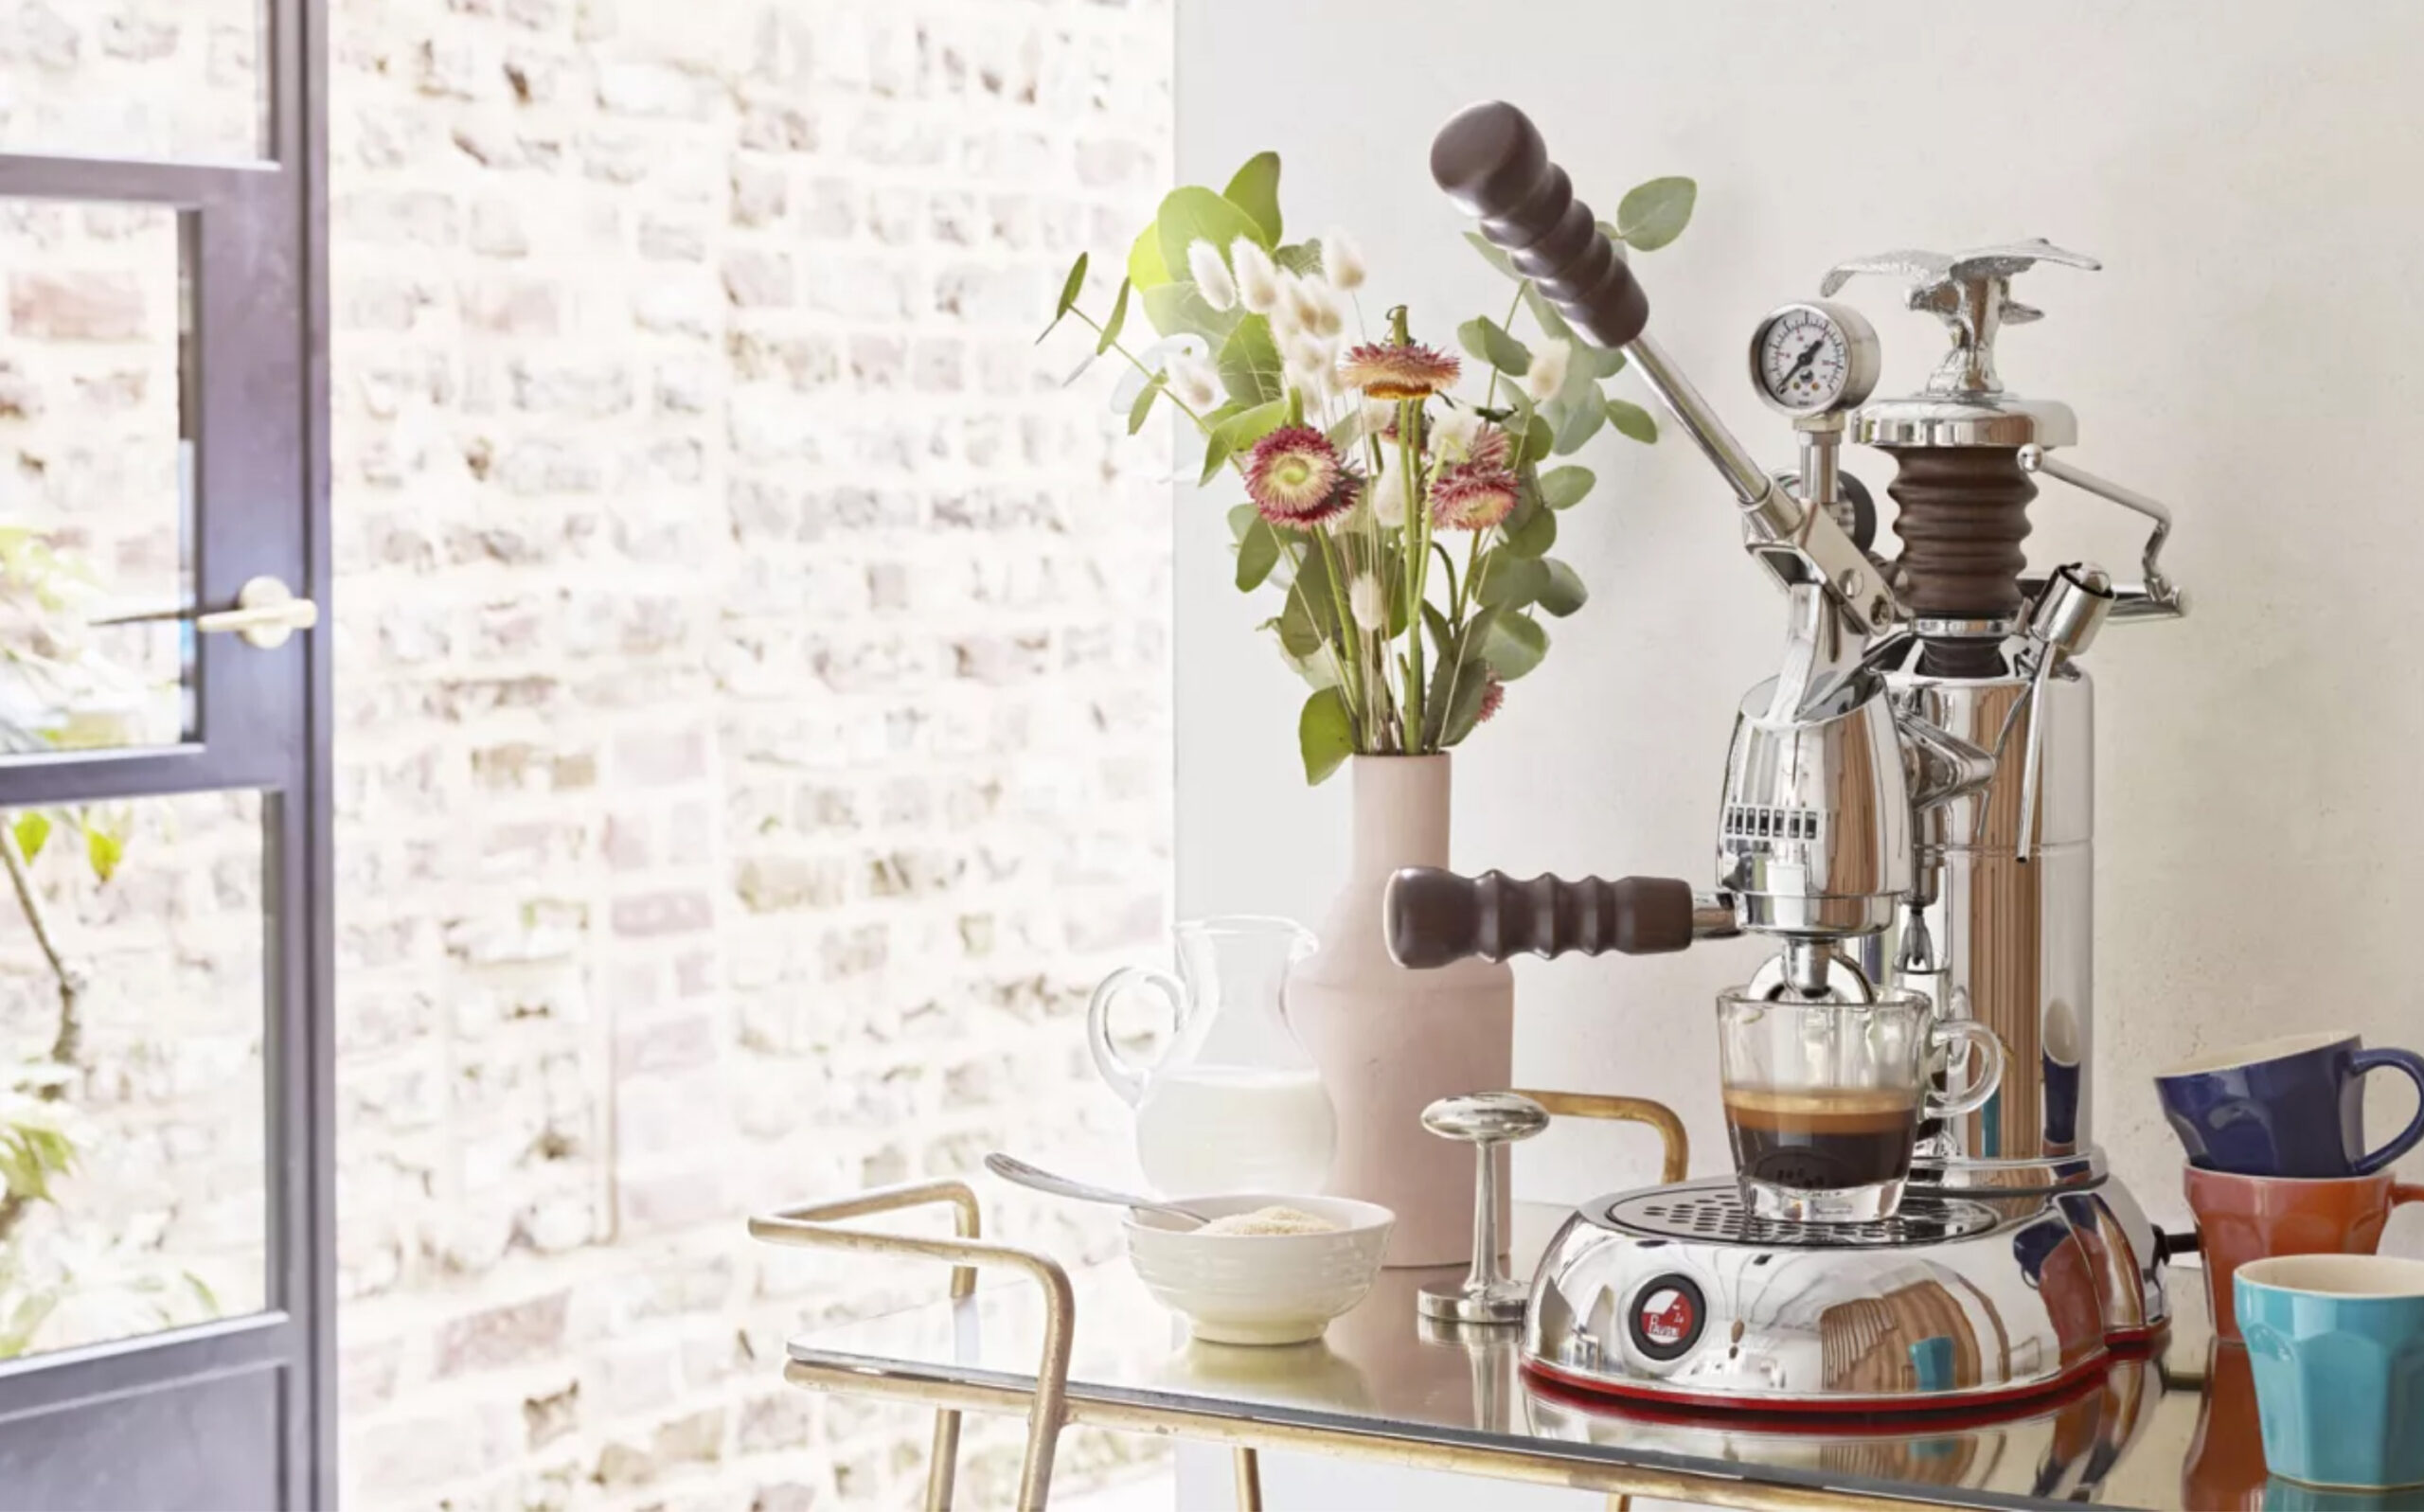 Smeg debuts premium espresso makers and grinder for real coffee lovers